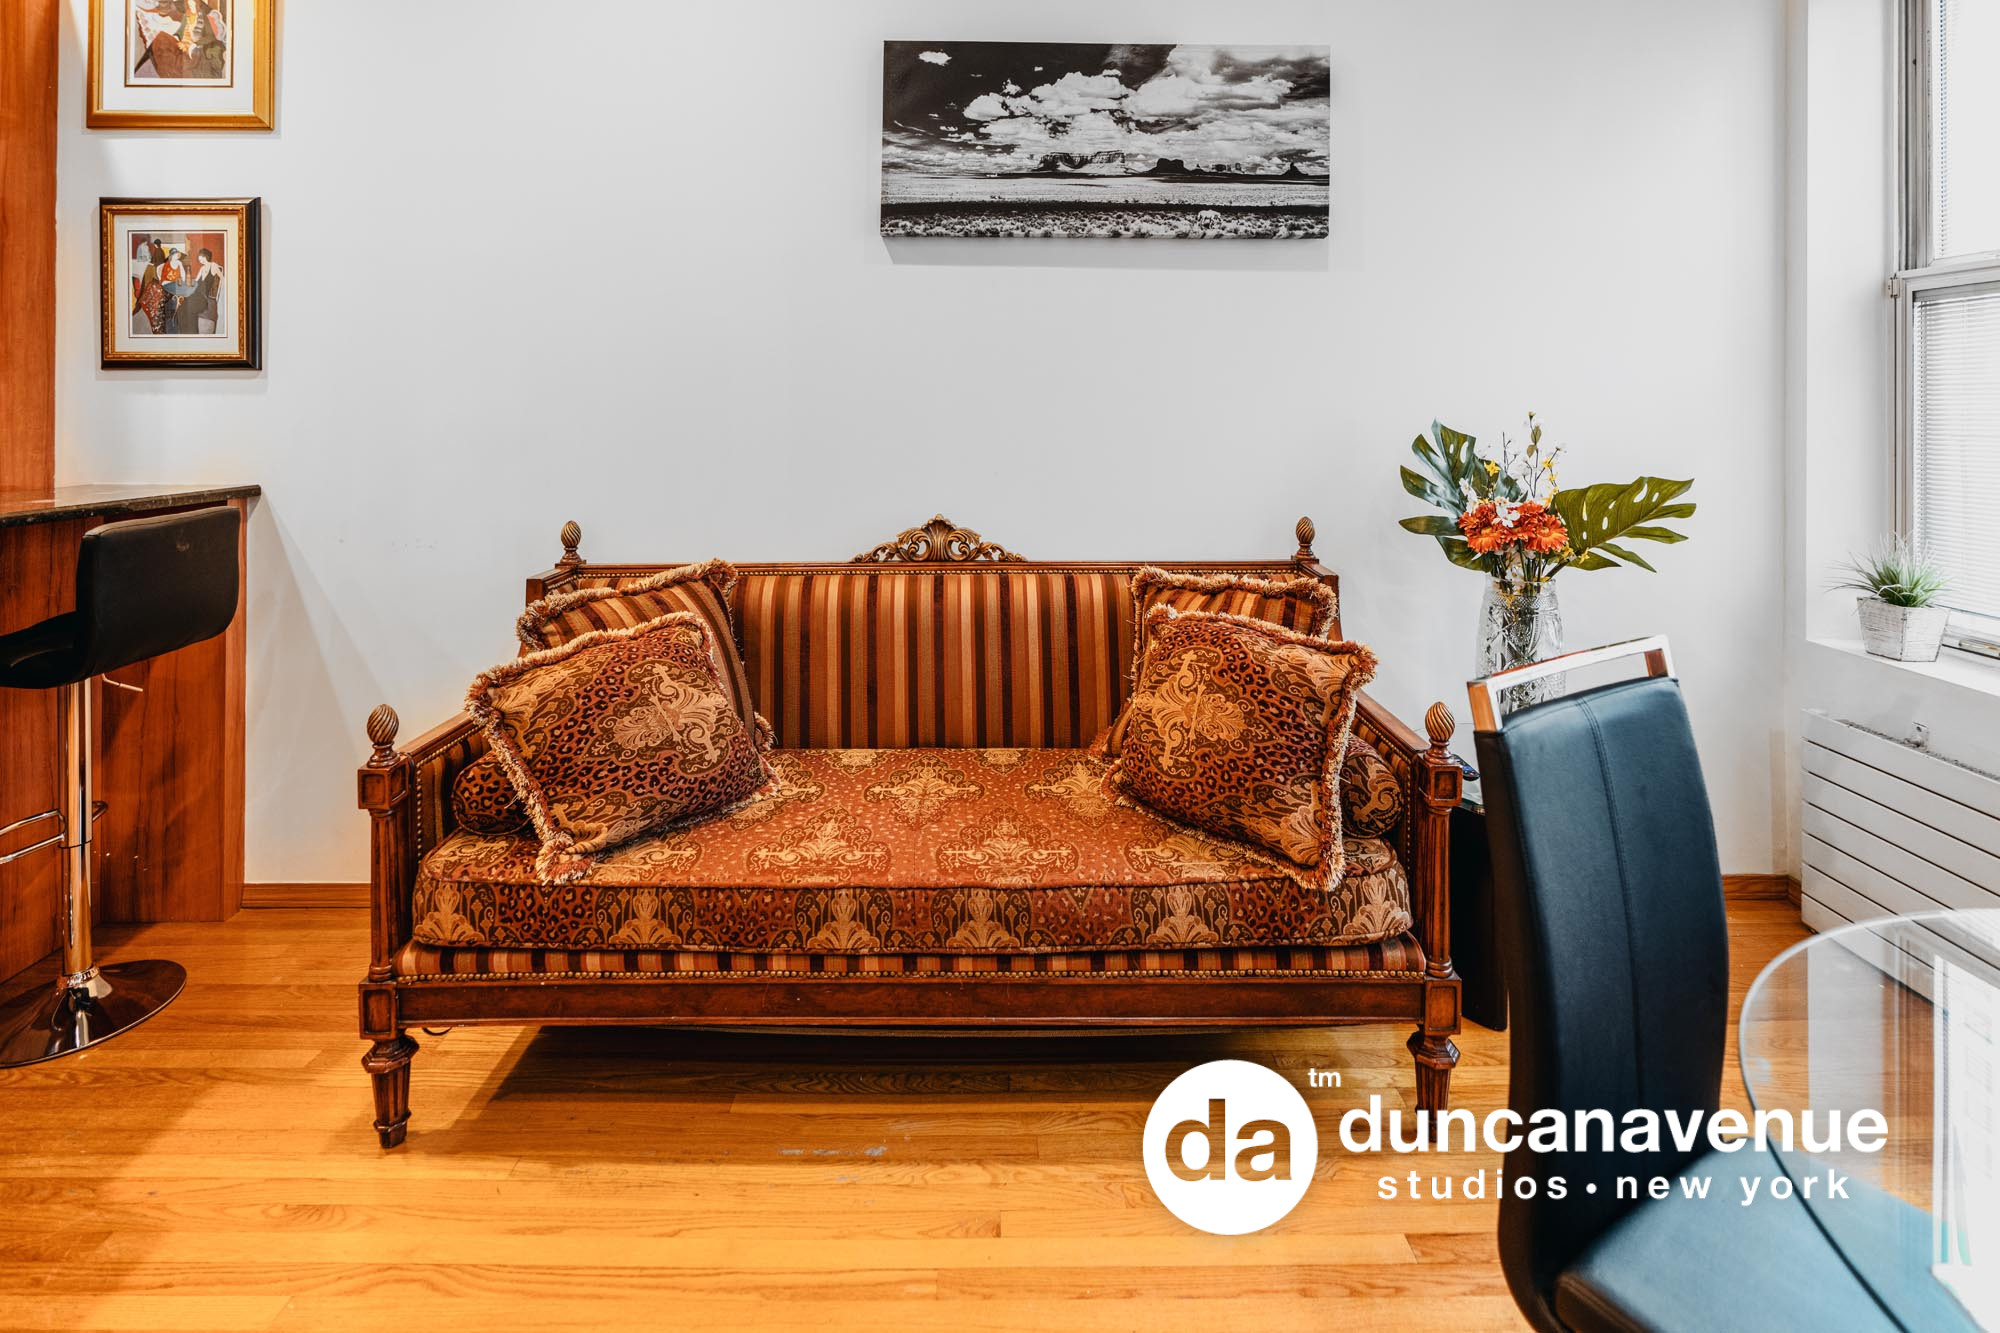 Midtown East Luxury Airbnb Listing – NYC Airbnb Photography – Capture the Beauty of Your Property with New York City's Premier Airbnb Photography Studio